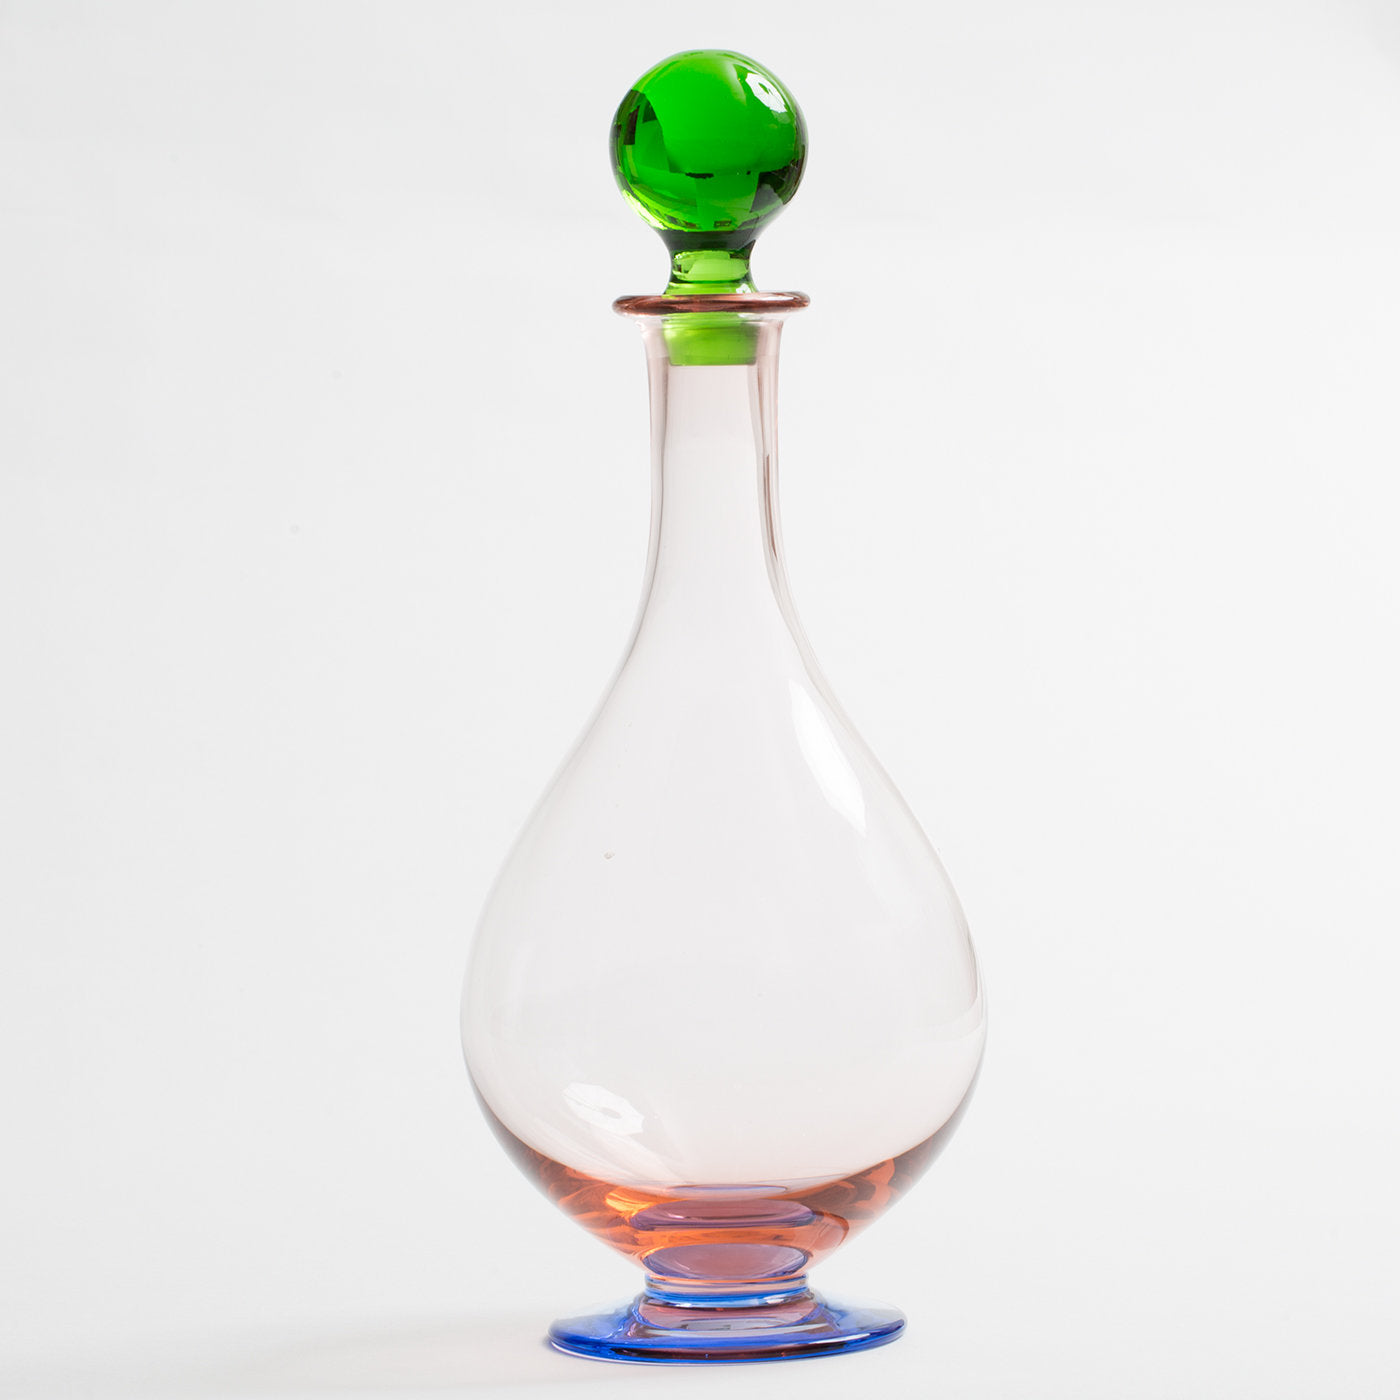 Burano Bottle and Pitcher - Alternative view 1